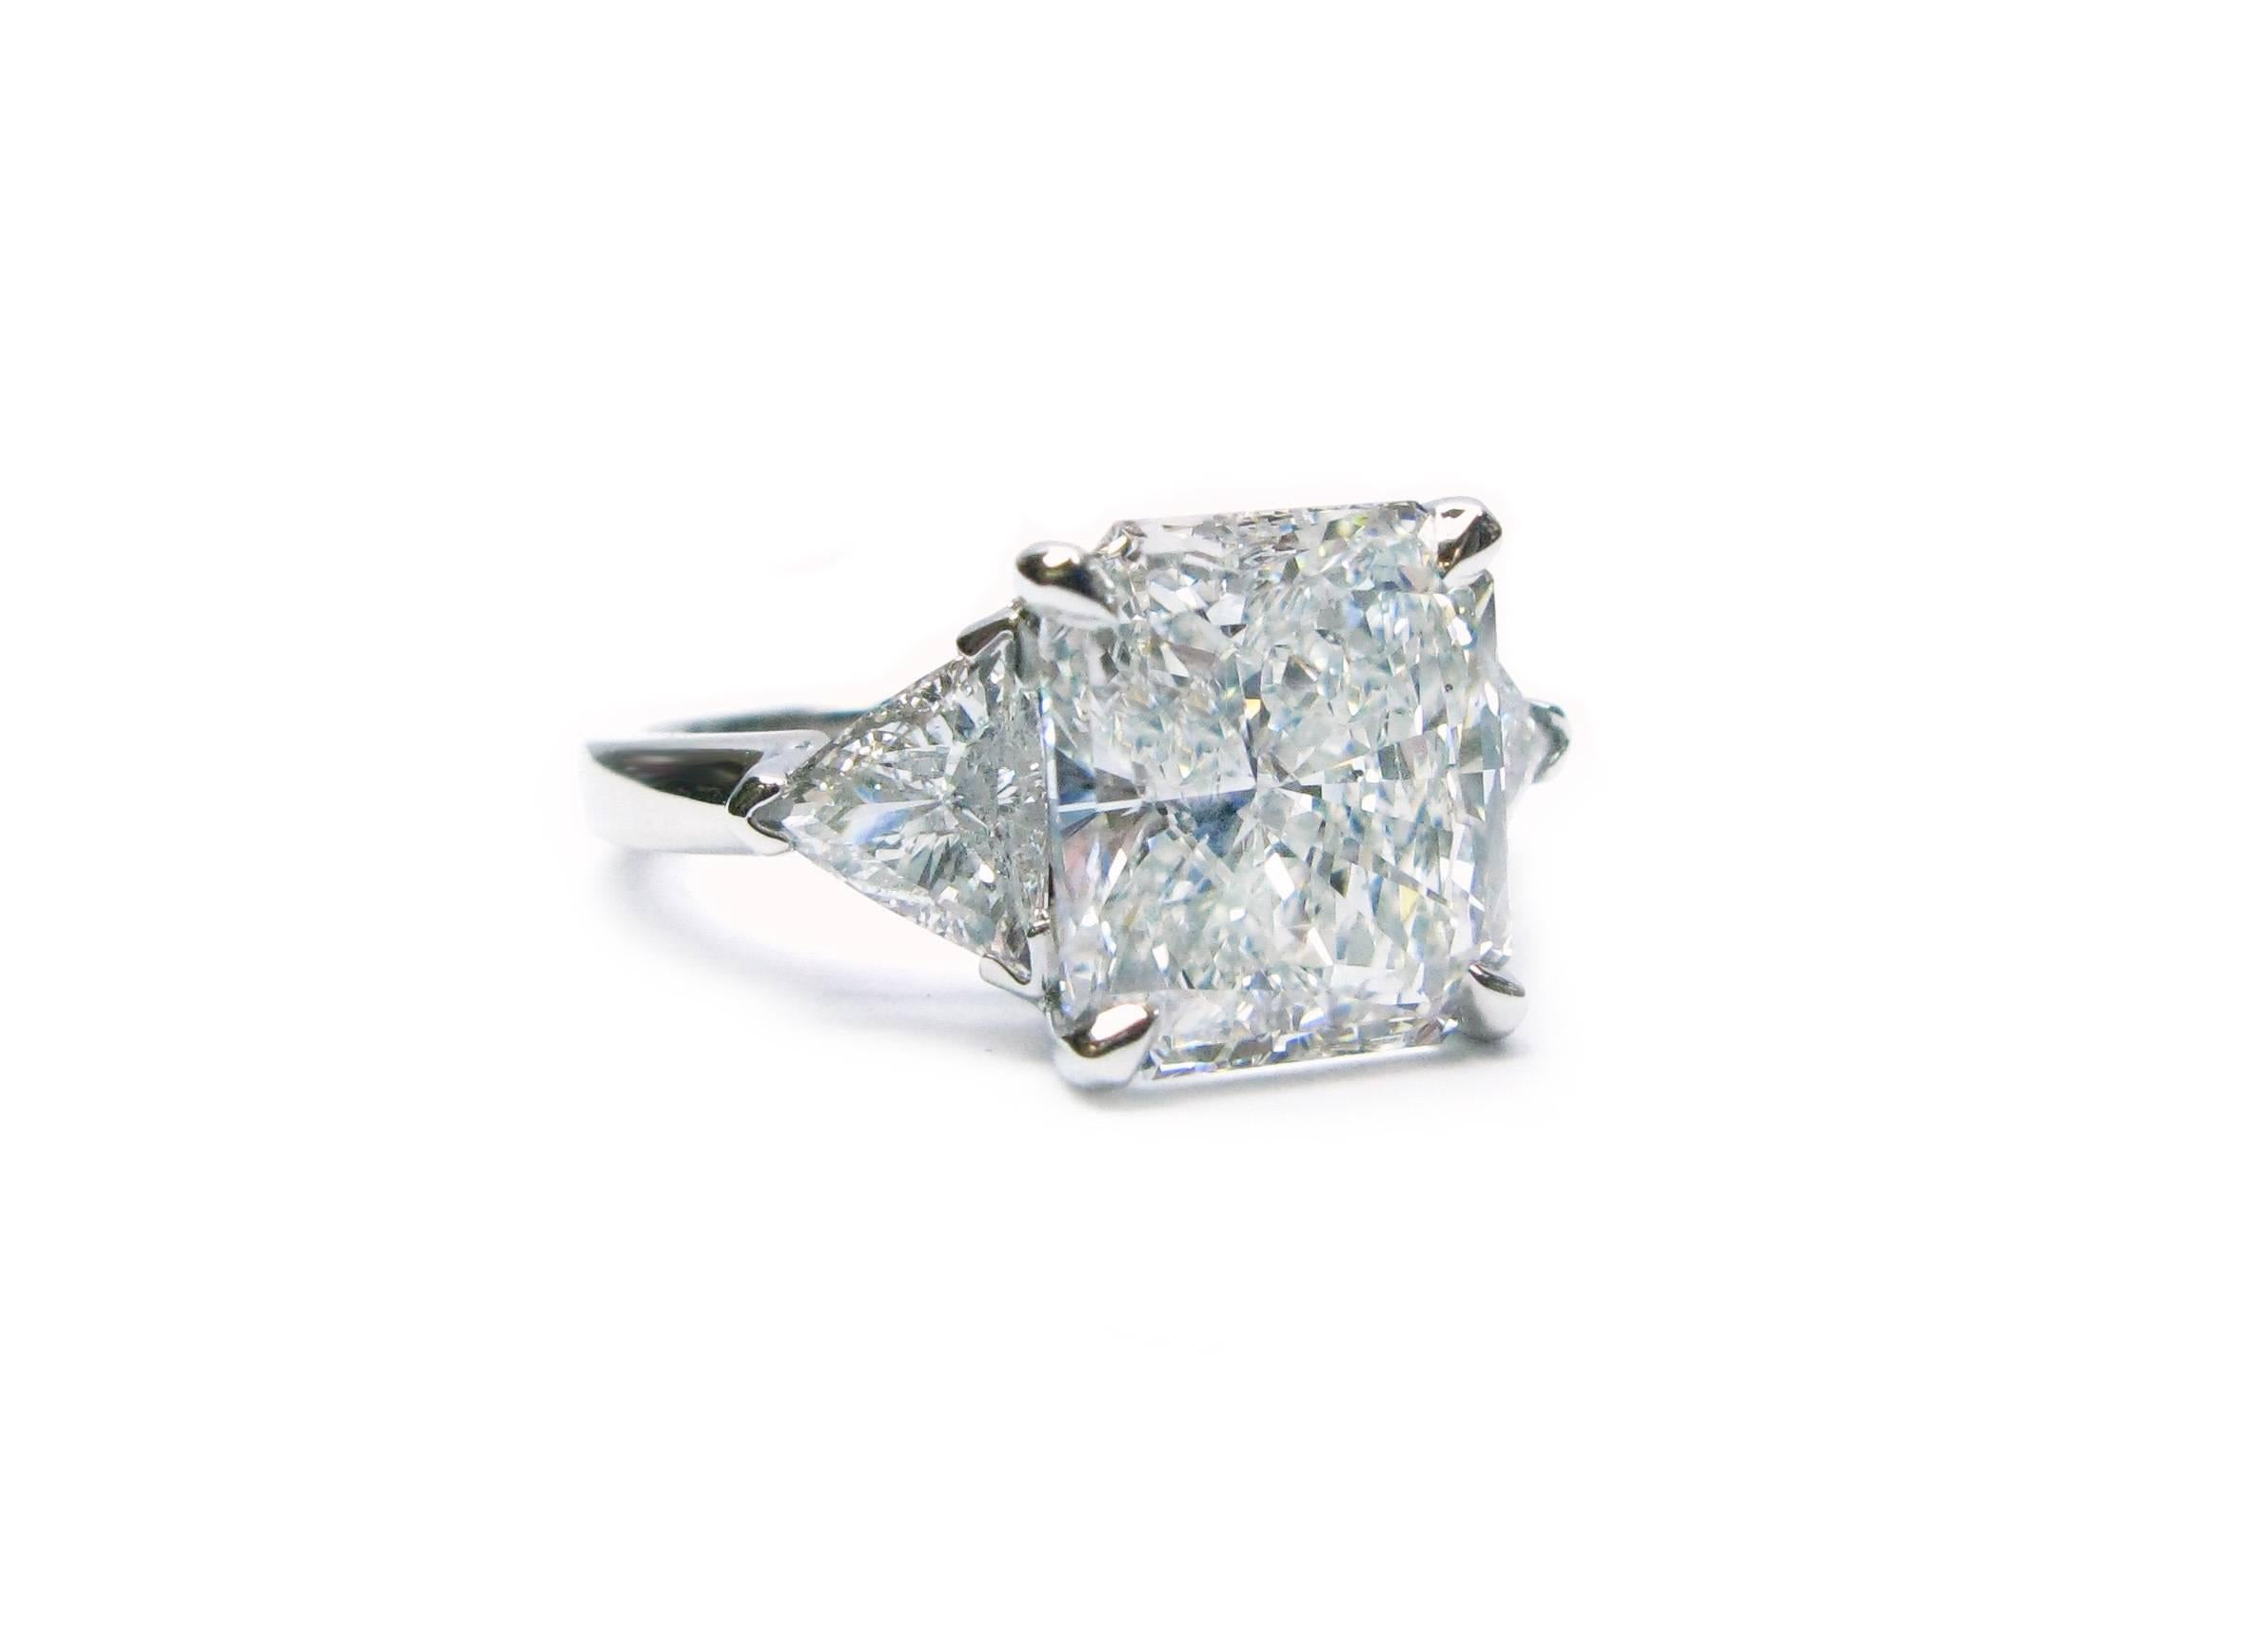 This stunning handmade platinum ring features a GIA certified 5.00ct, G color, SI2 clarity, Radiant cut diamond center stone with approximately 1.30ctw trillion diamond sidestones. This lovely engagement ring will make one lucky lady very happy!